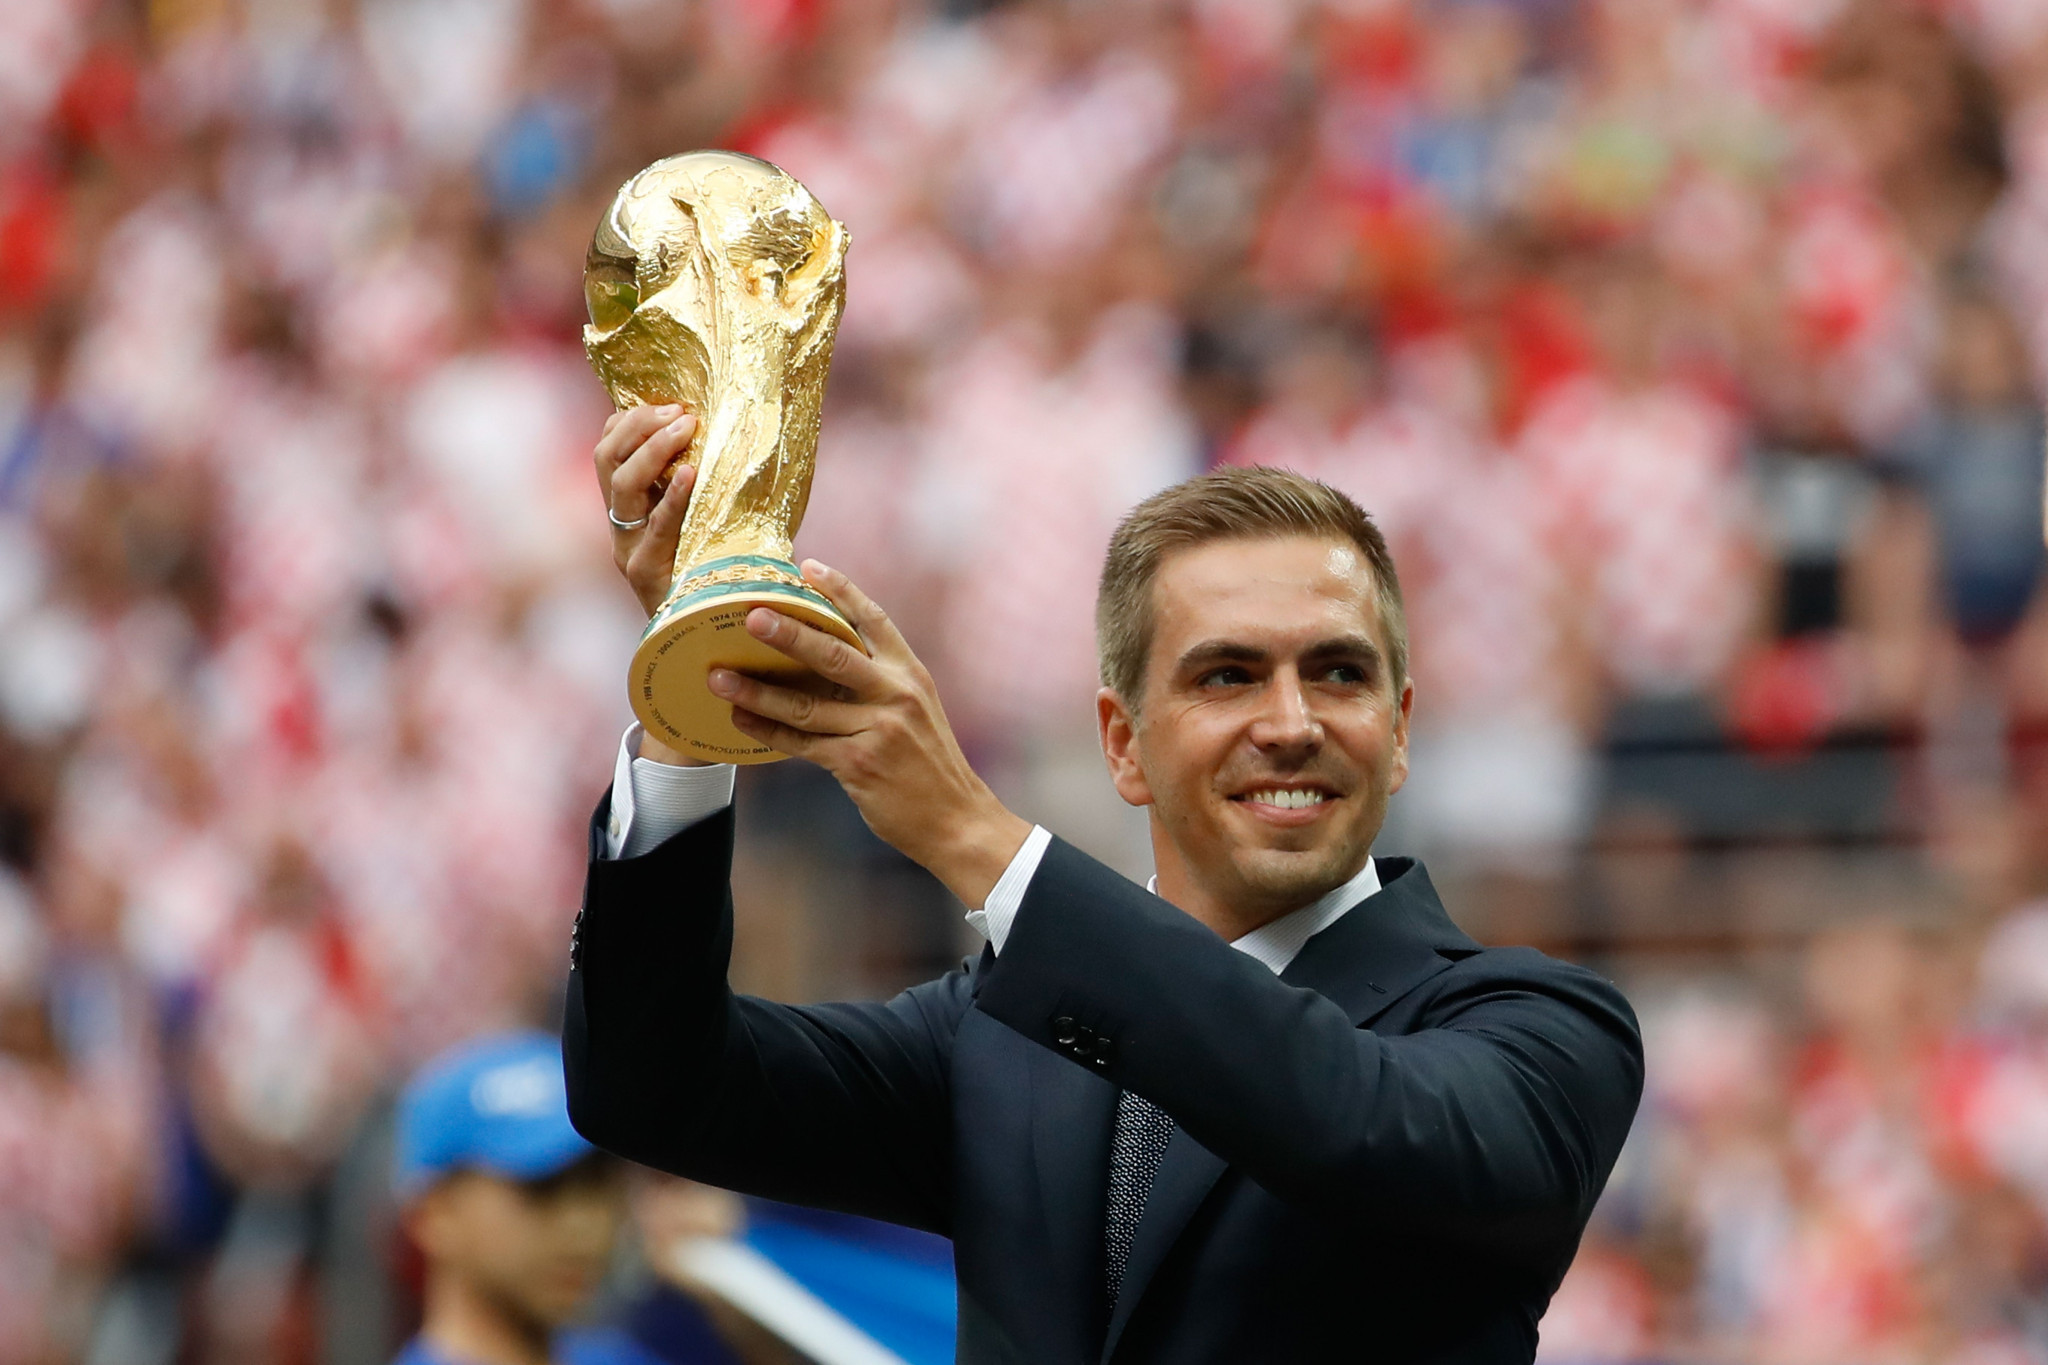 Philipp Lahm captained Germany to the 2014 World Cup and has been serving as ambassador of their bid for Euro 2024 ©Getty Images